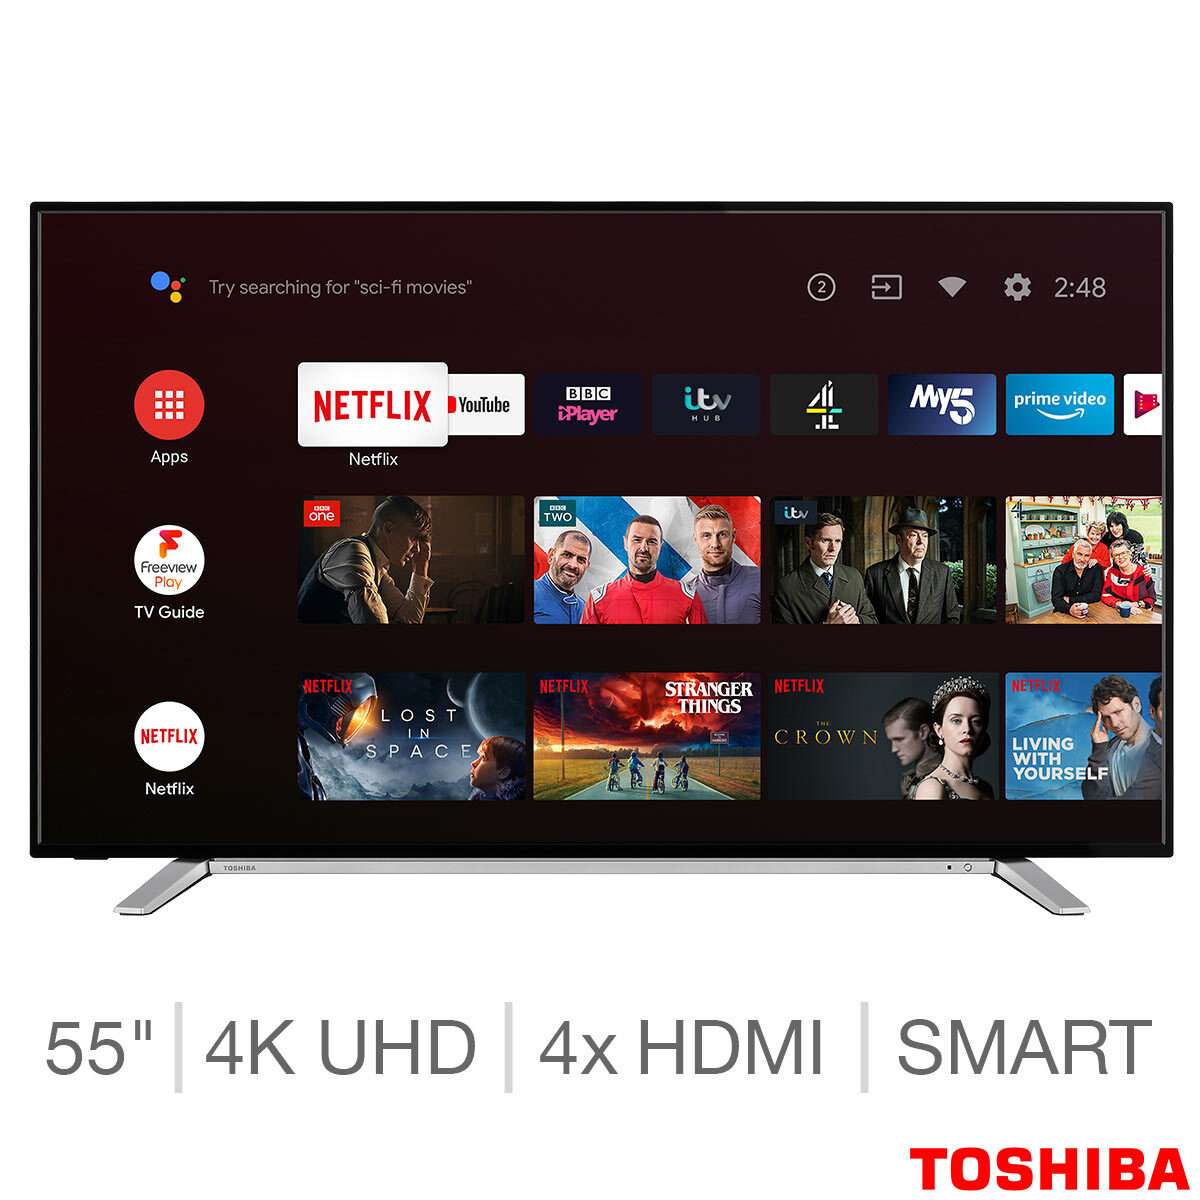 samsung-55-inch-tv-costco-outlet-prices-save-43-jlcatj-gob-mx